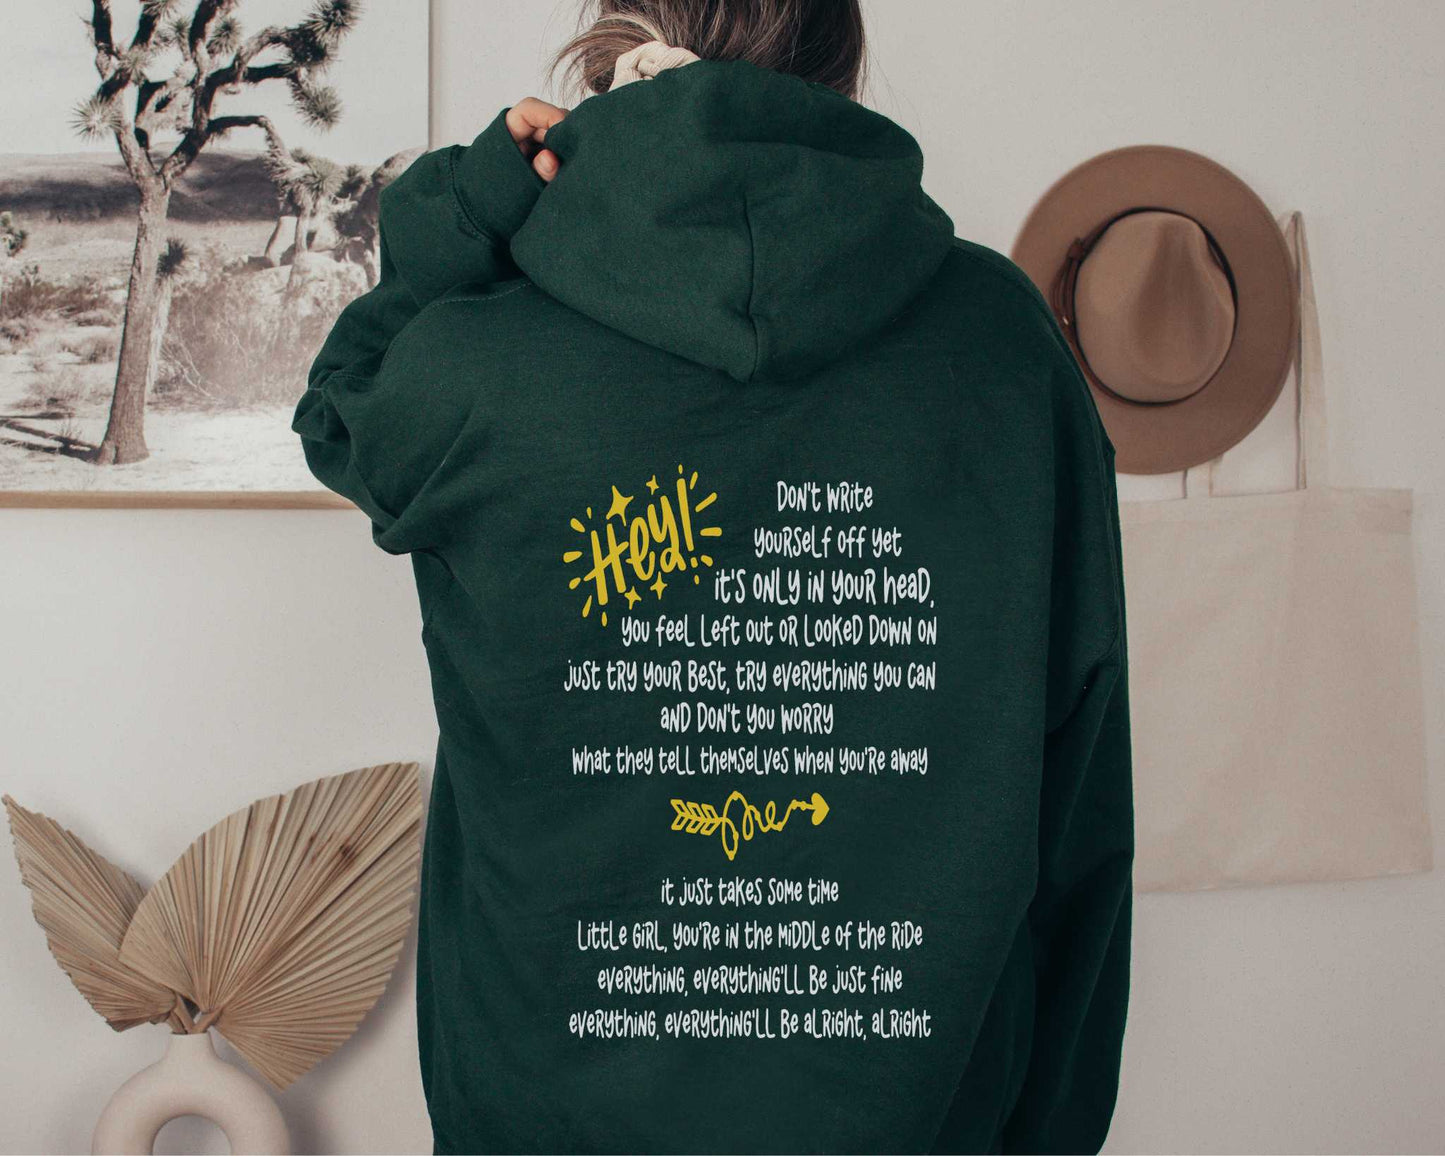 Jimmy Eat World "The Middle" Emo Kid Hoodie in Forest